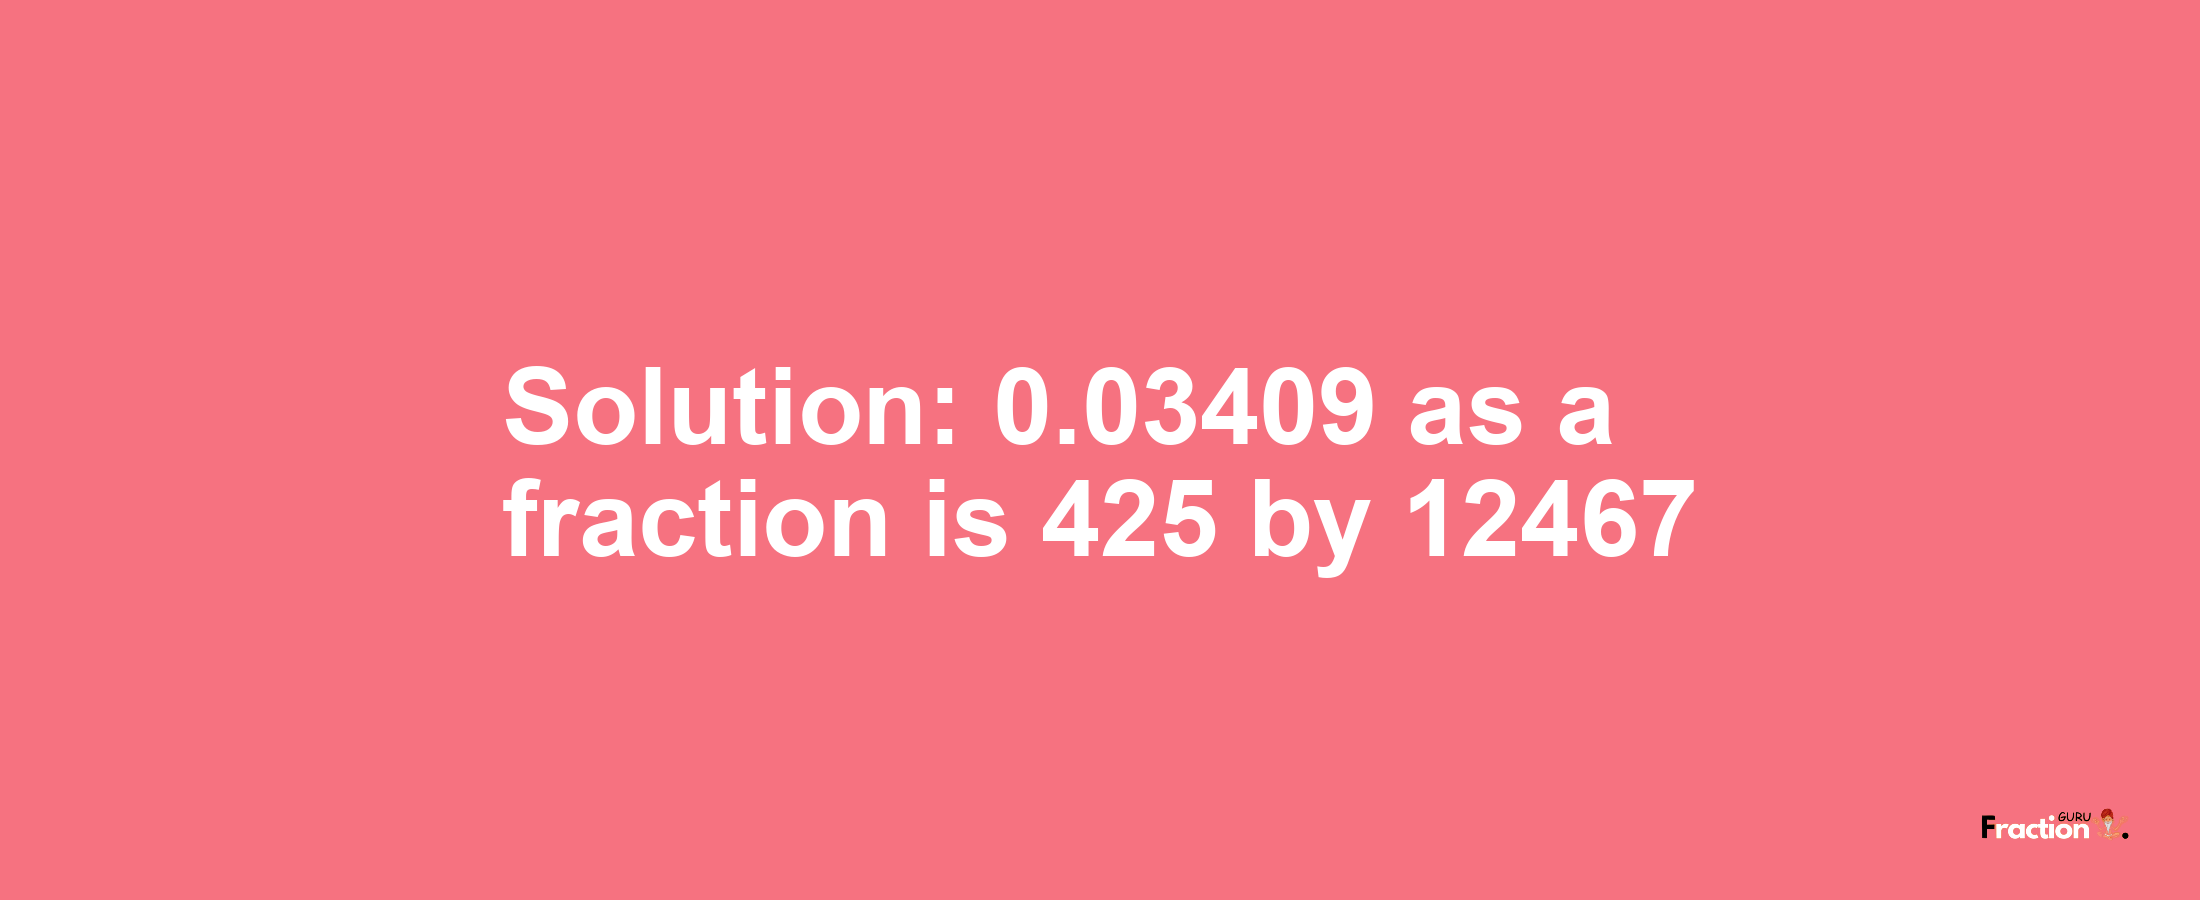 Solution:0.03409 as a fraction is 425/12467